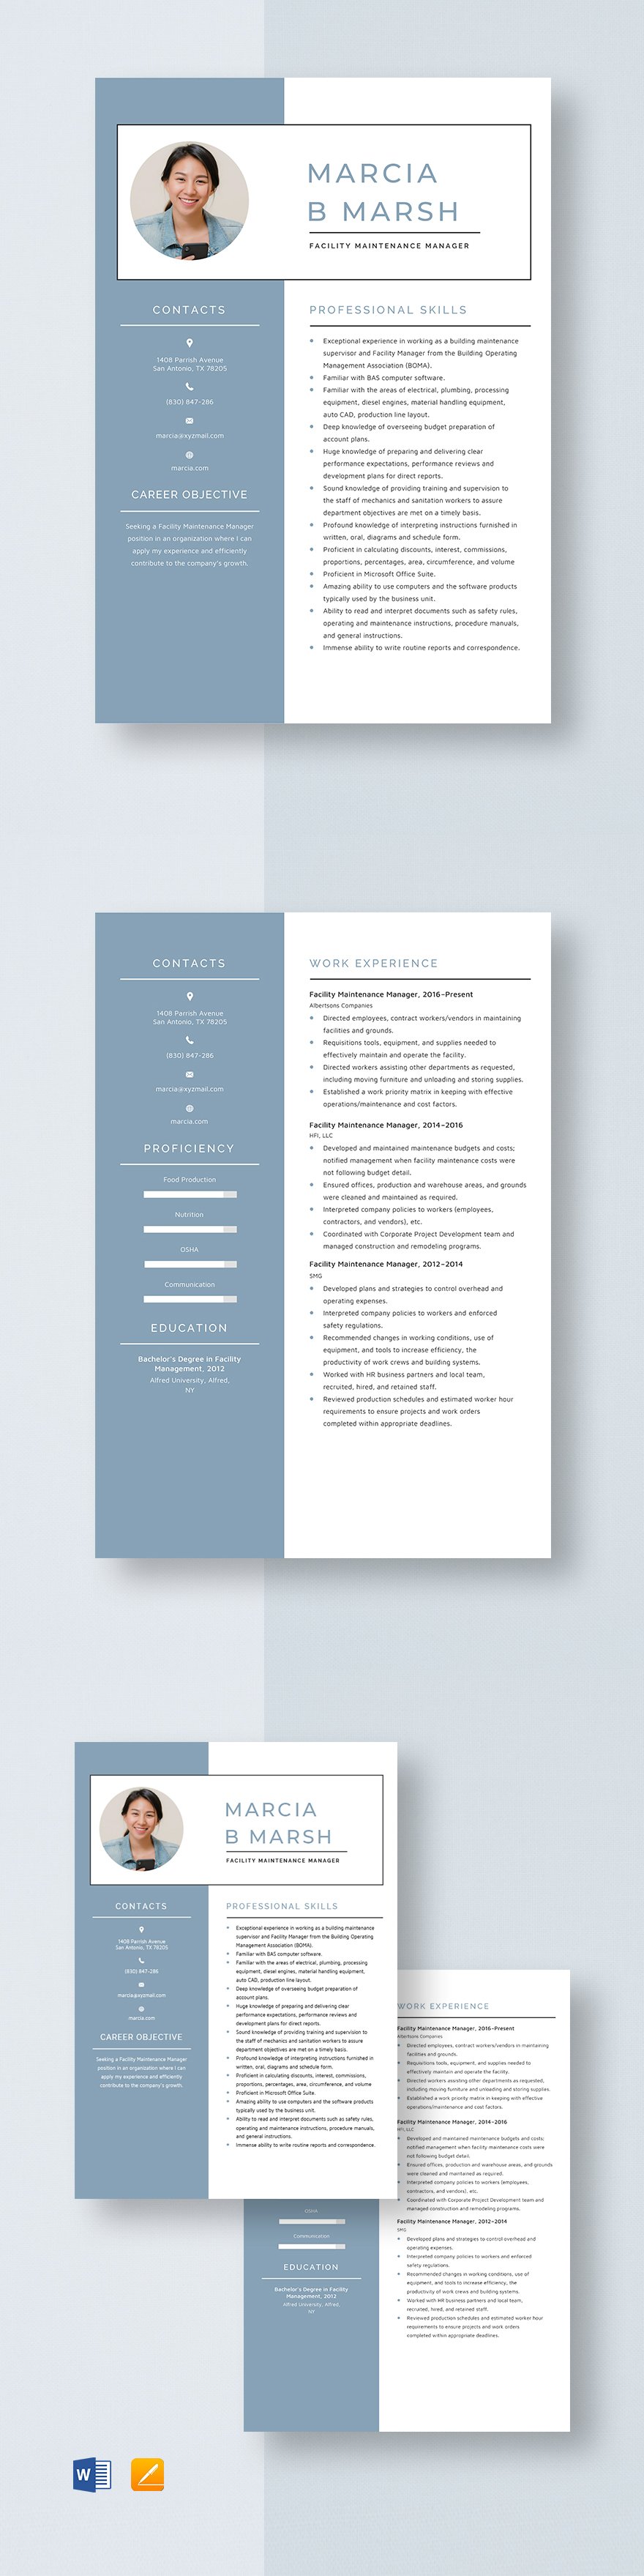 maintenance-manager-resume-templates-8-designs-free-downloads-template